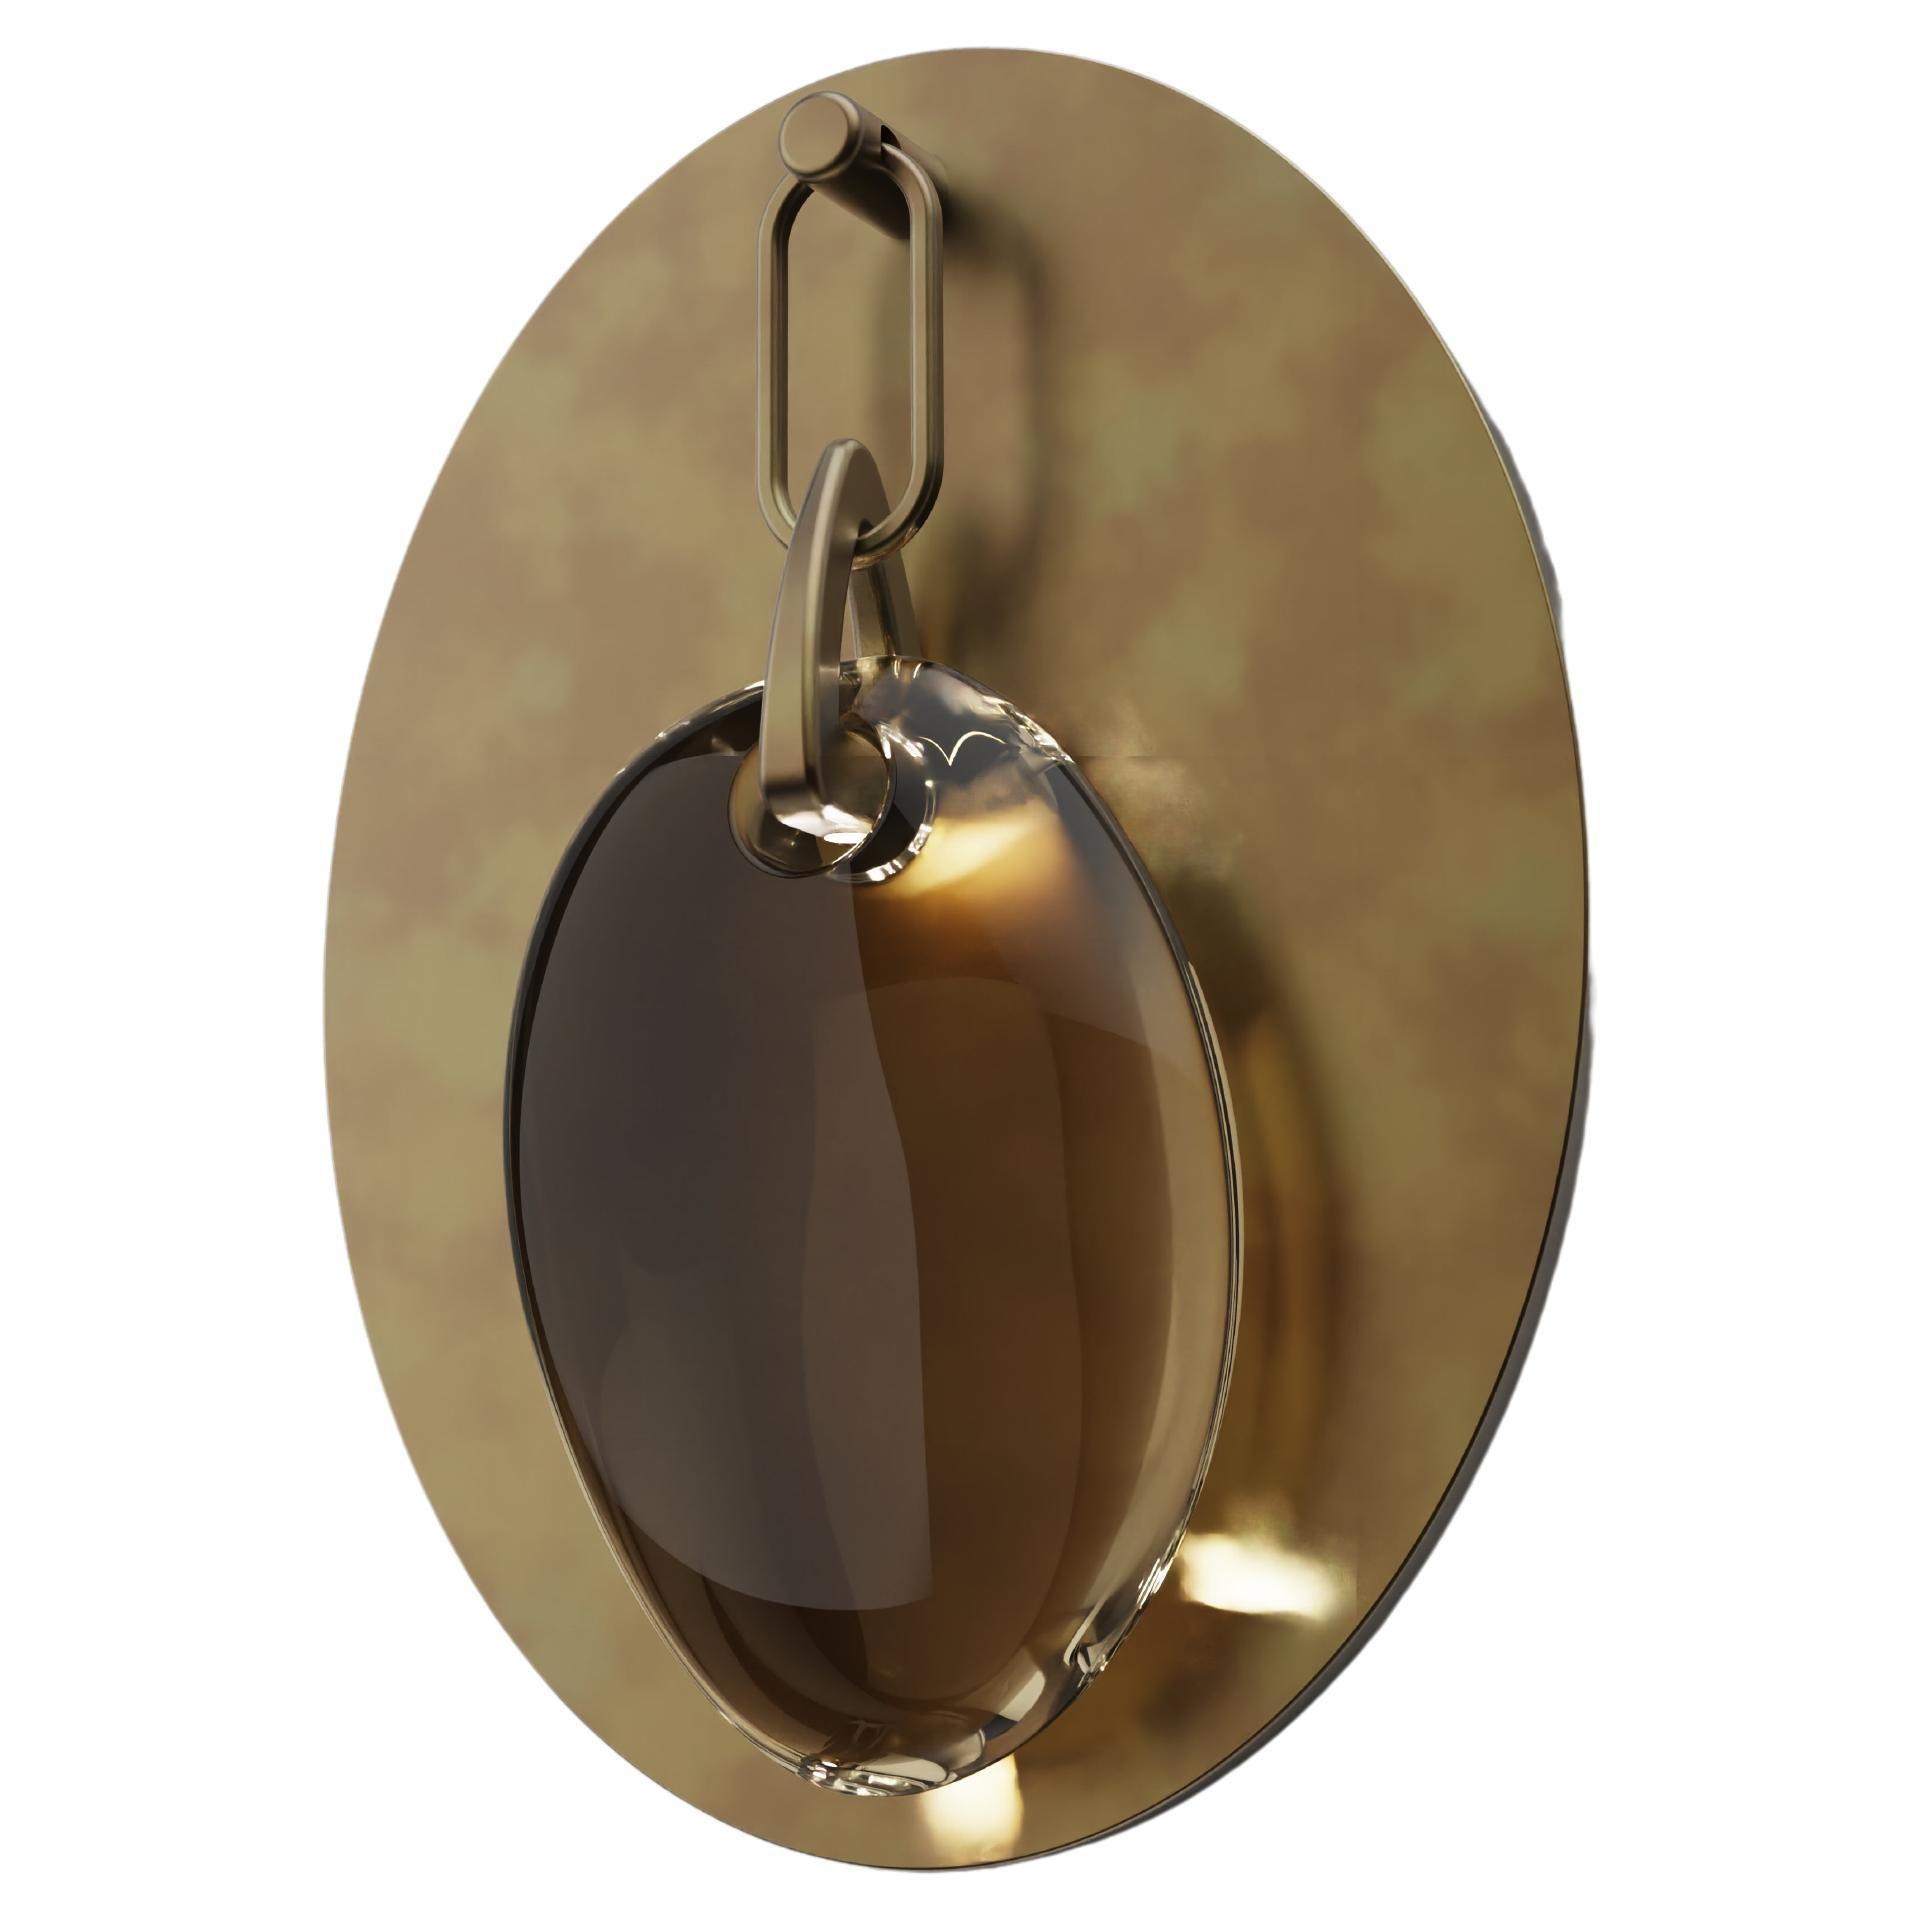 Imagin Pebble Wall Sconce in Antique Brass and Glass